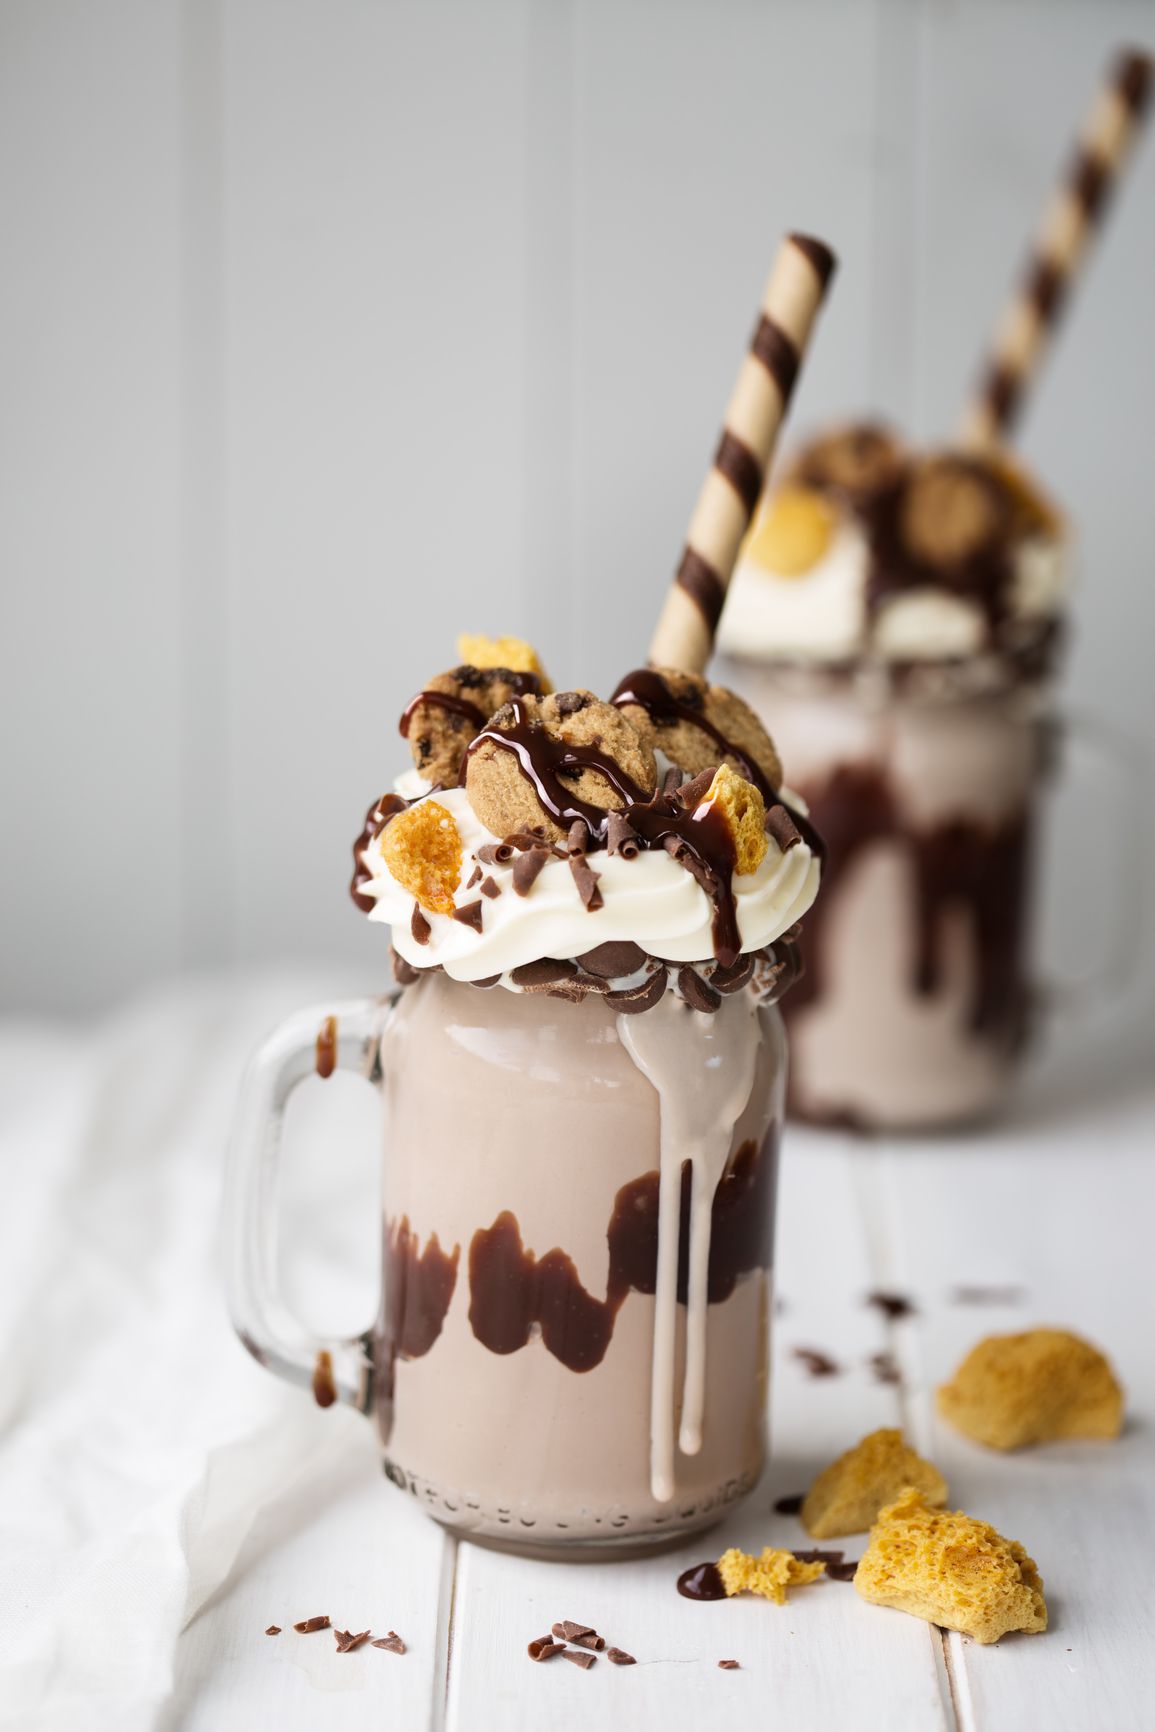 Try This Quick and Easy Cookie Milkshake Recipe